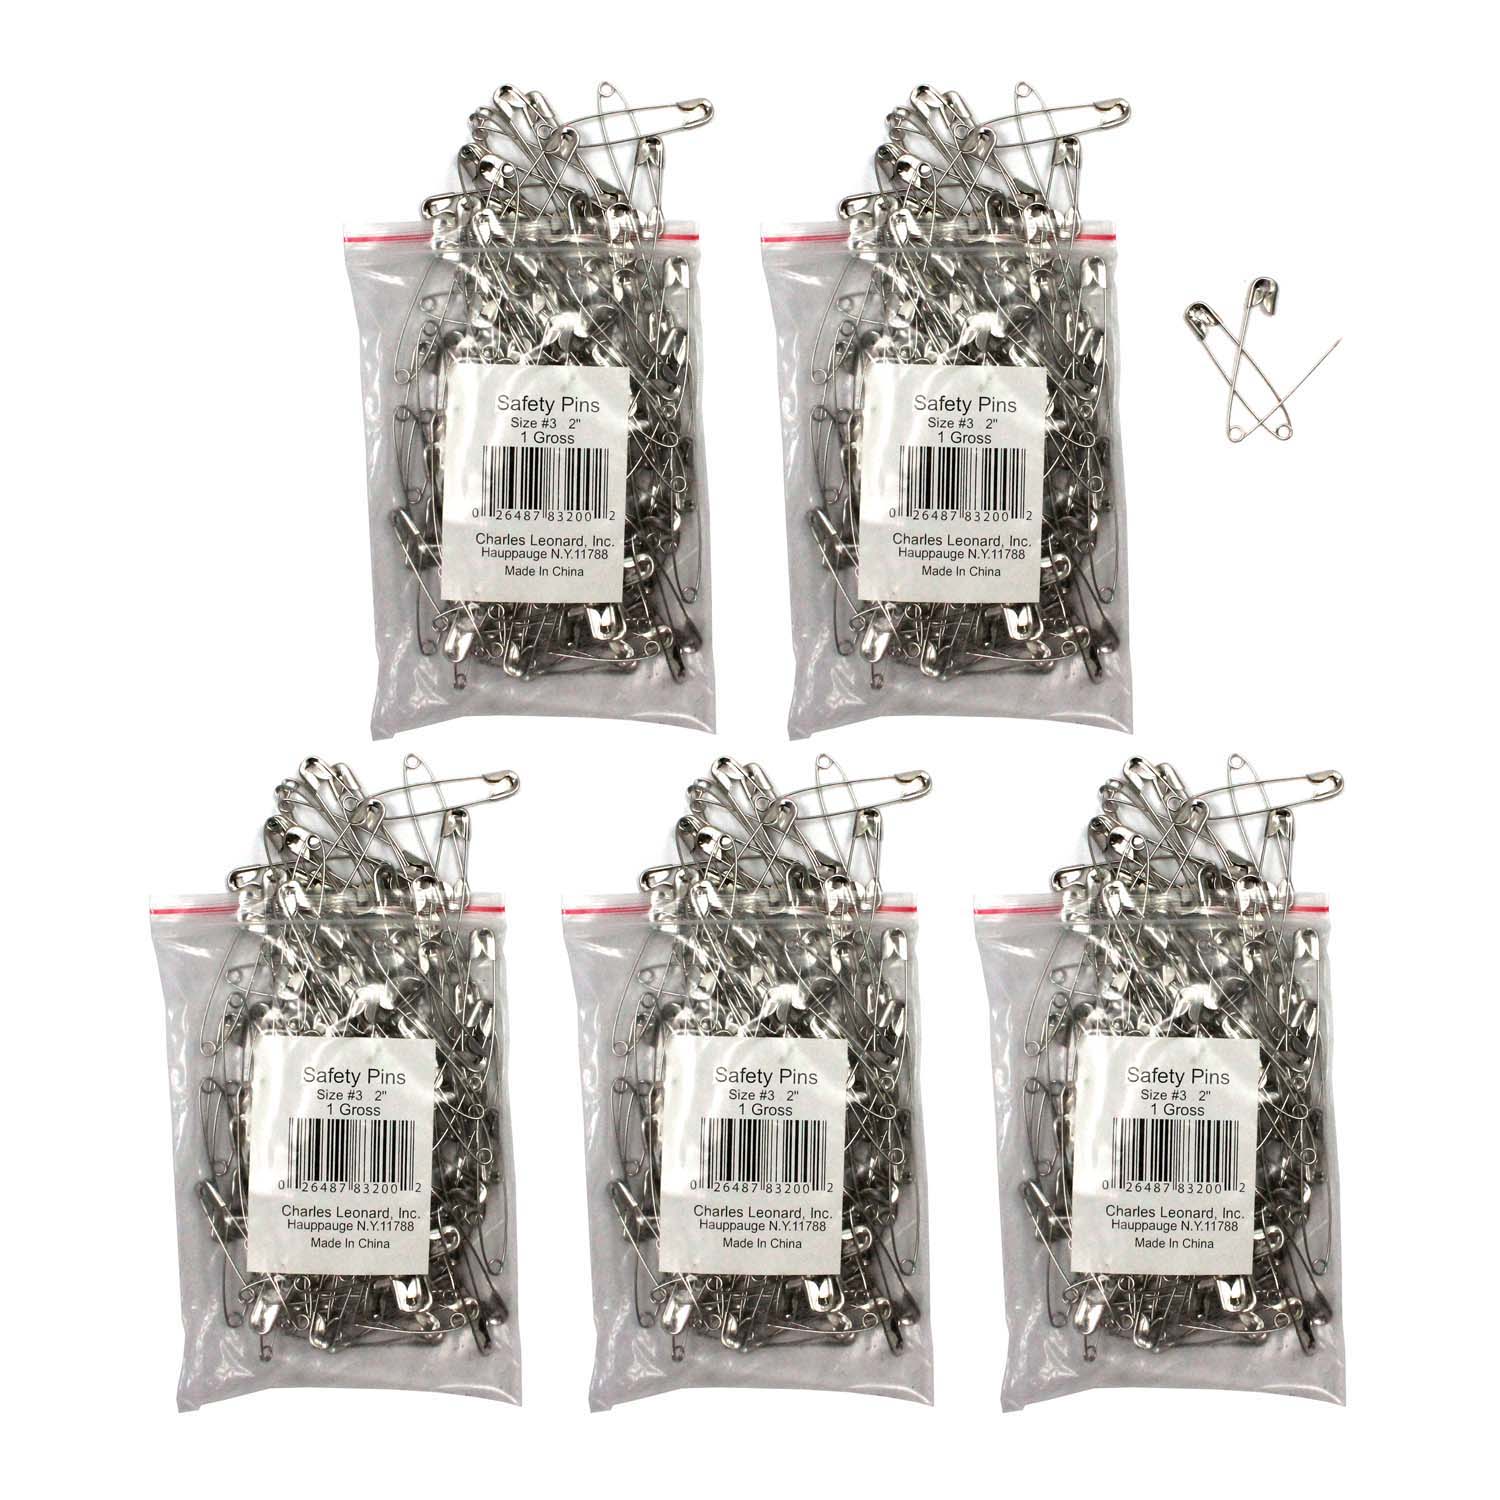 Safety Pins 2", 144 Per Pack, 5 Packs